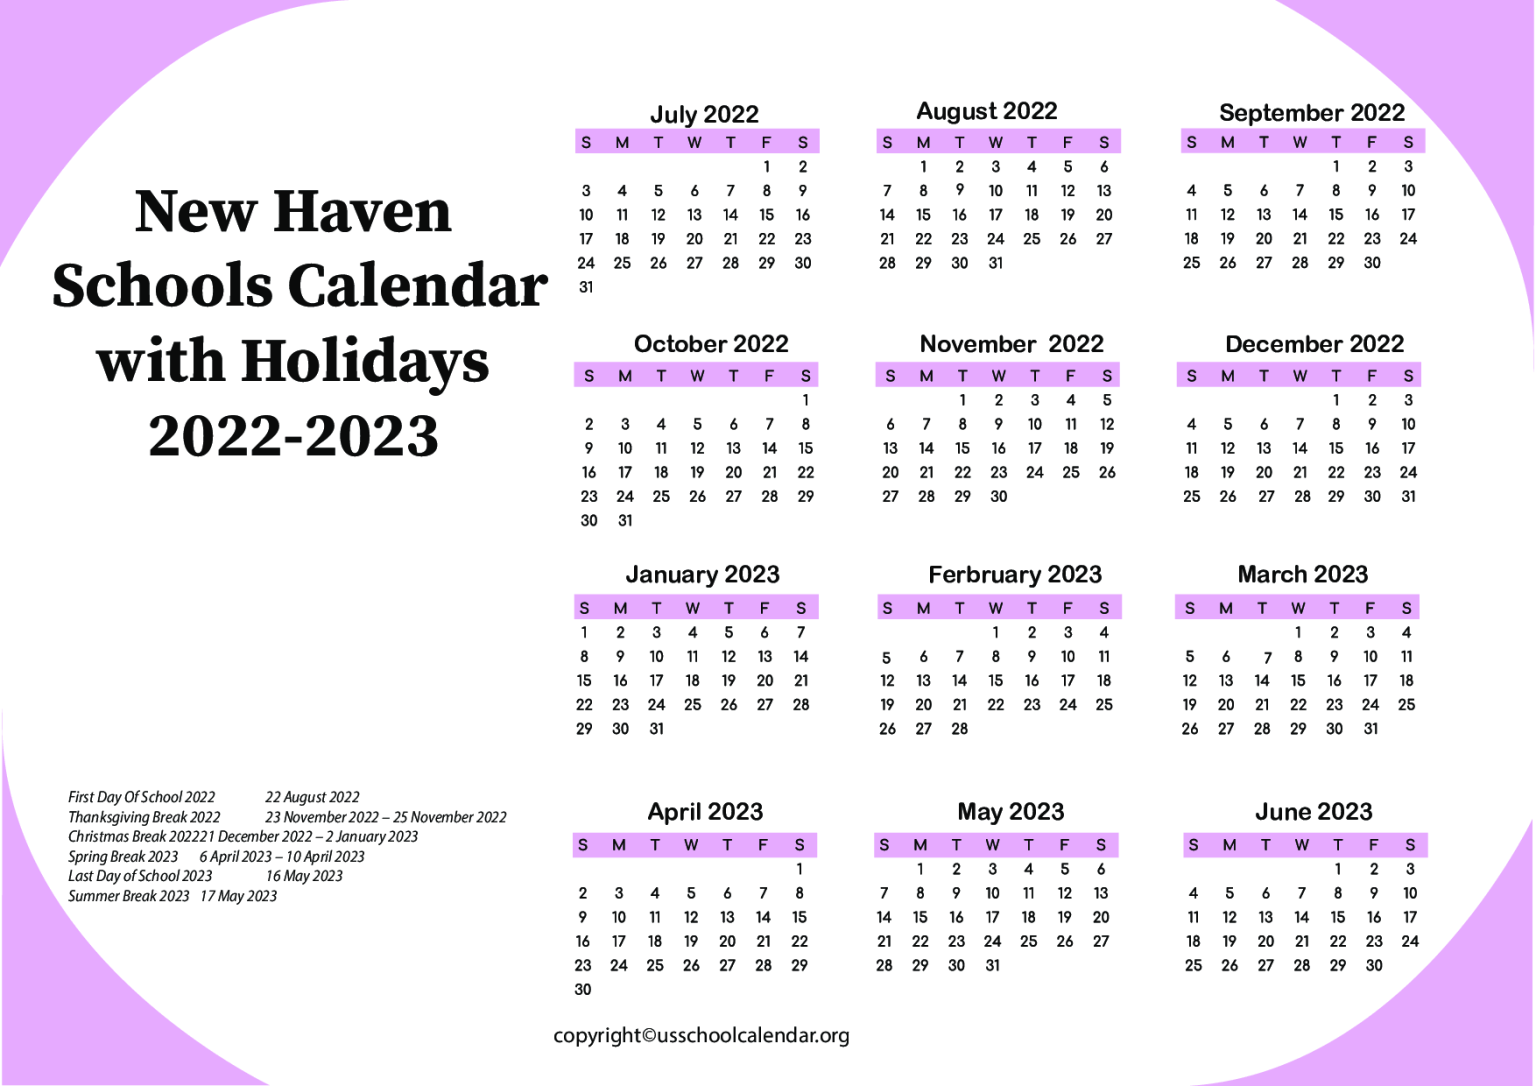 New Haven Schools Calendar with Holidays 20222023